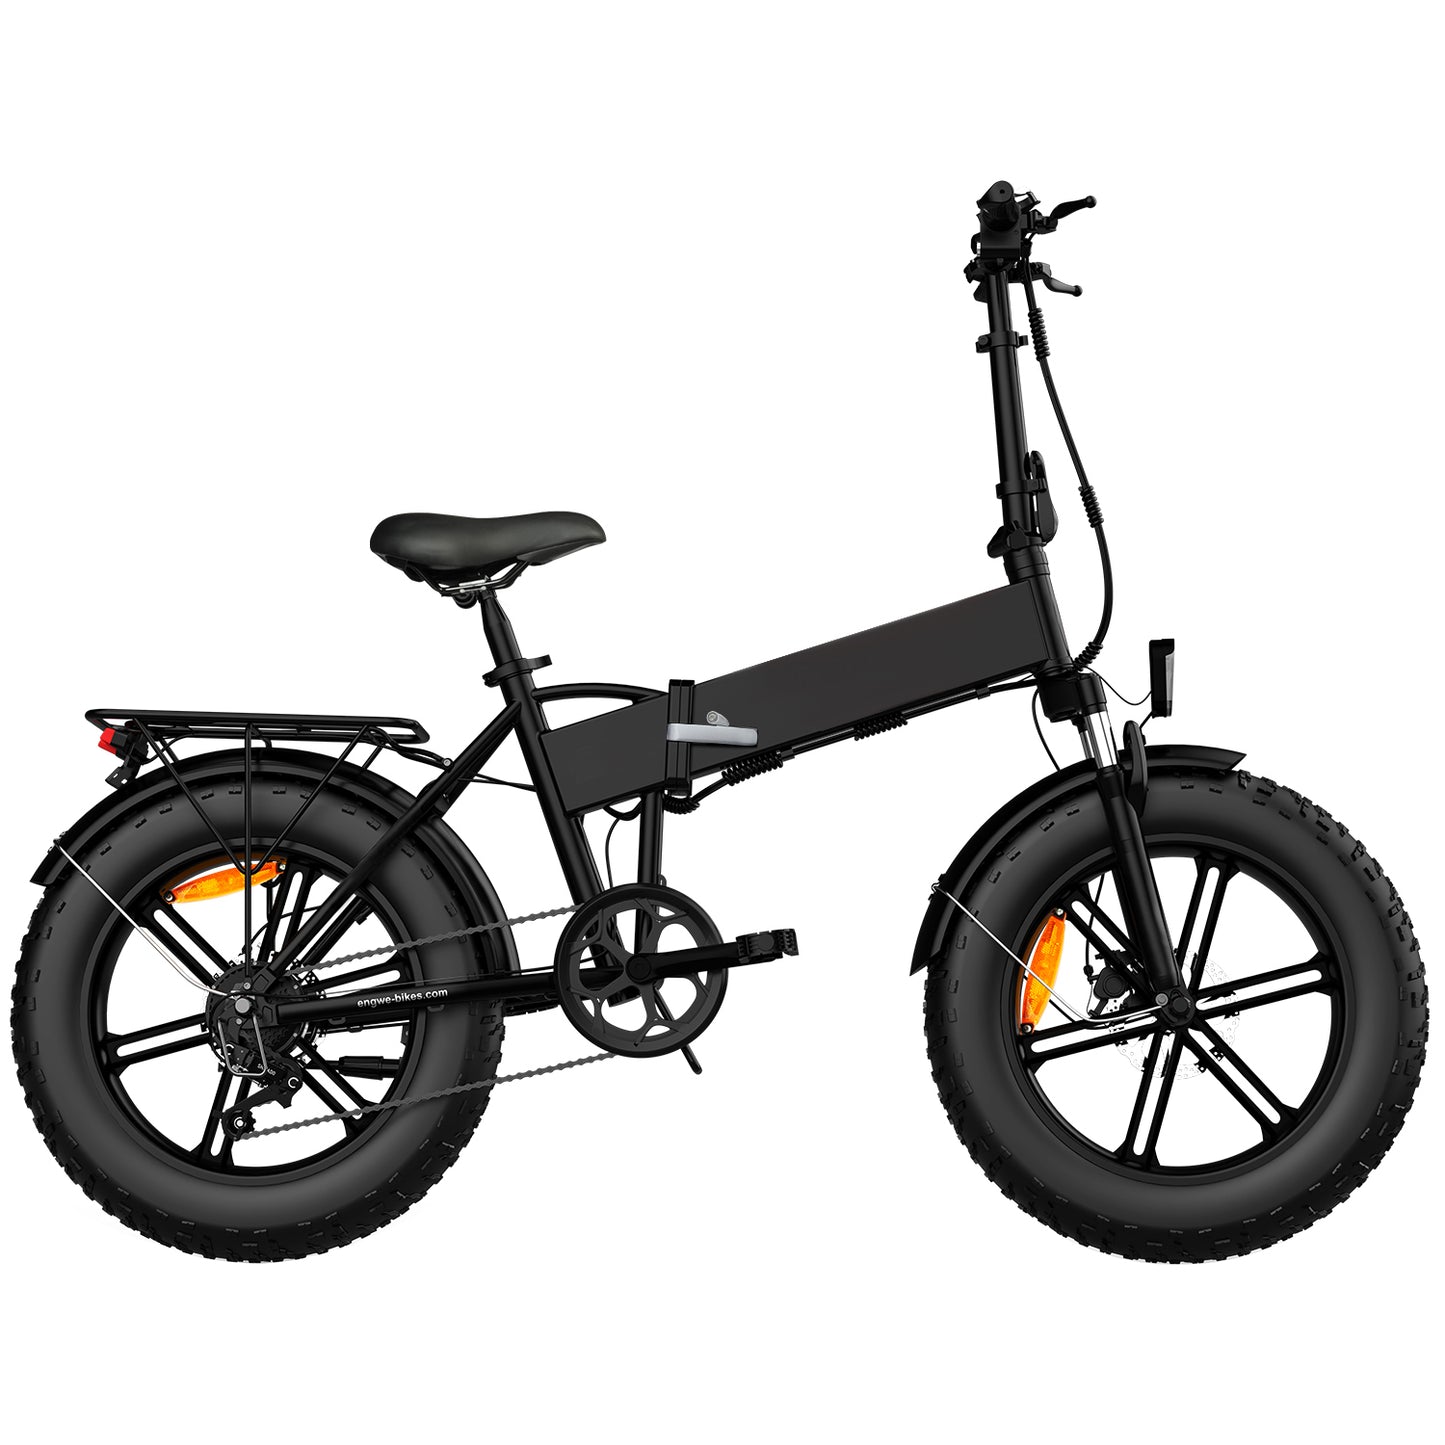 US Warehouse Stock GYL051 20*4.0" Fat Tire Electric Bike with 750W Motor 48V 13Ah Battery